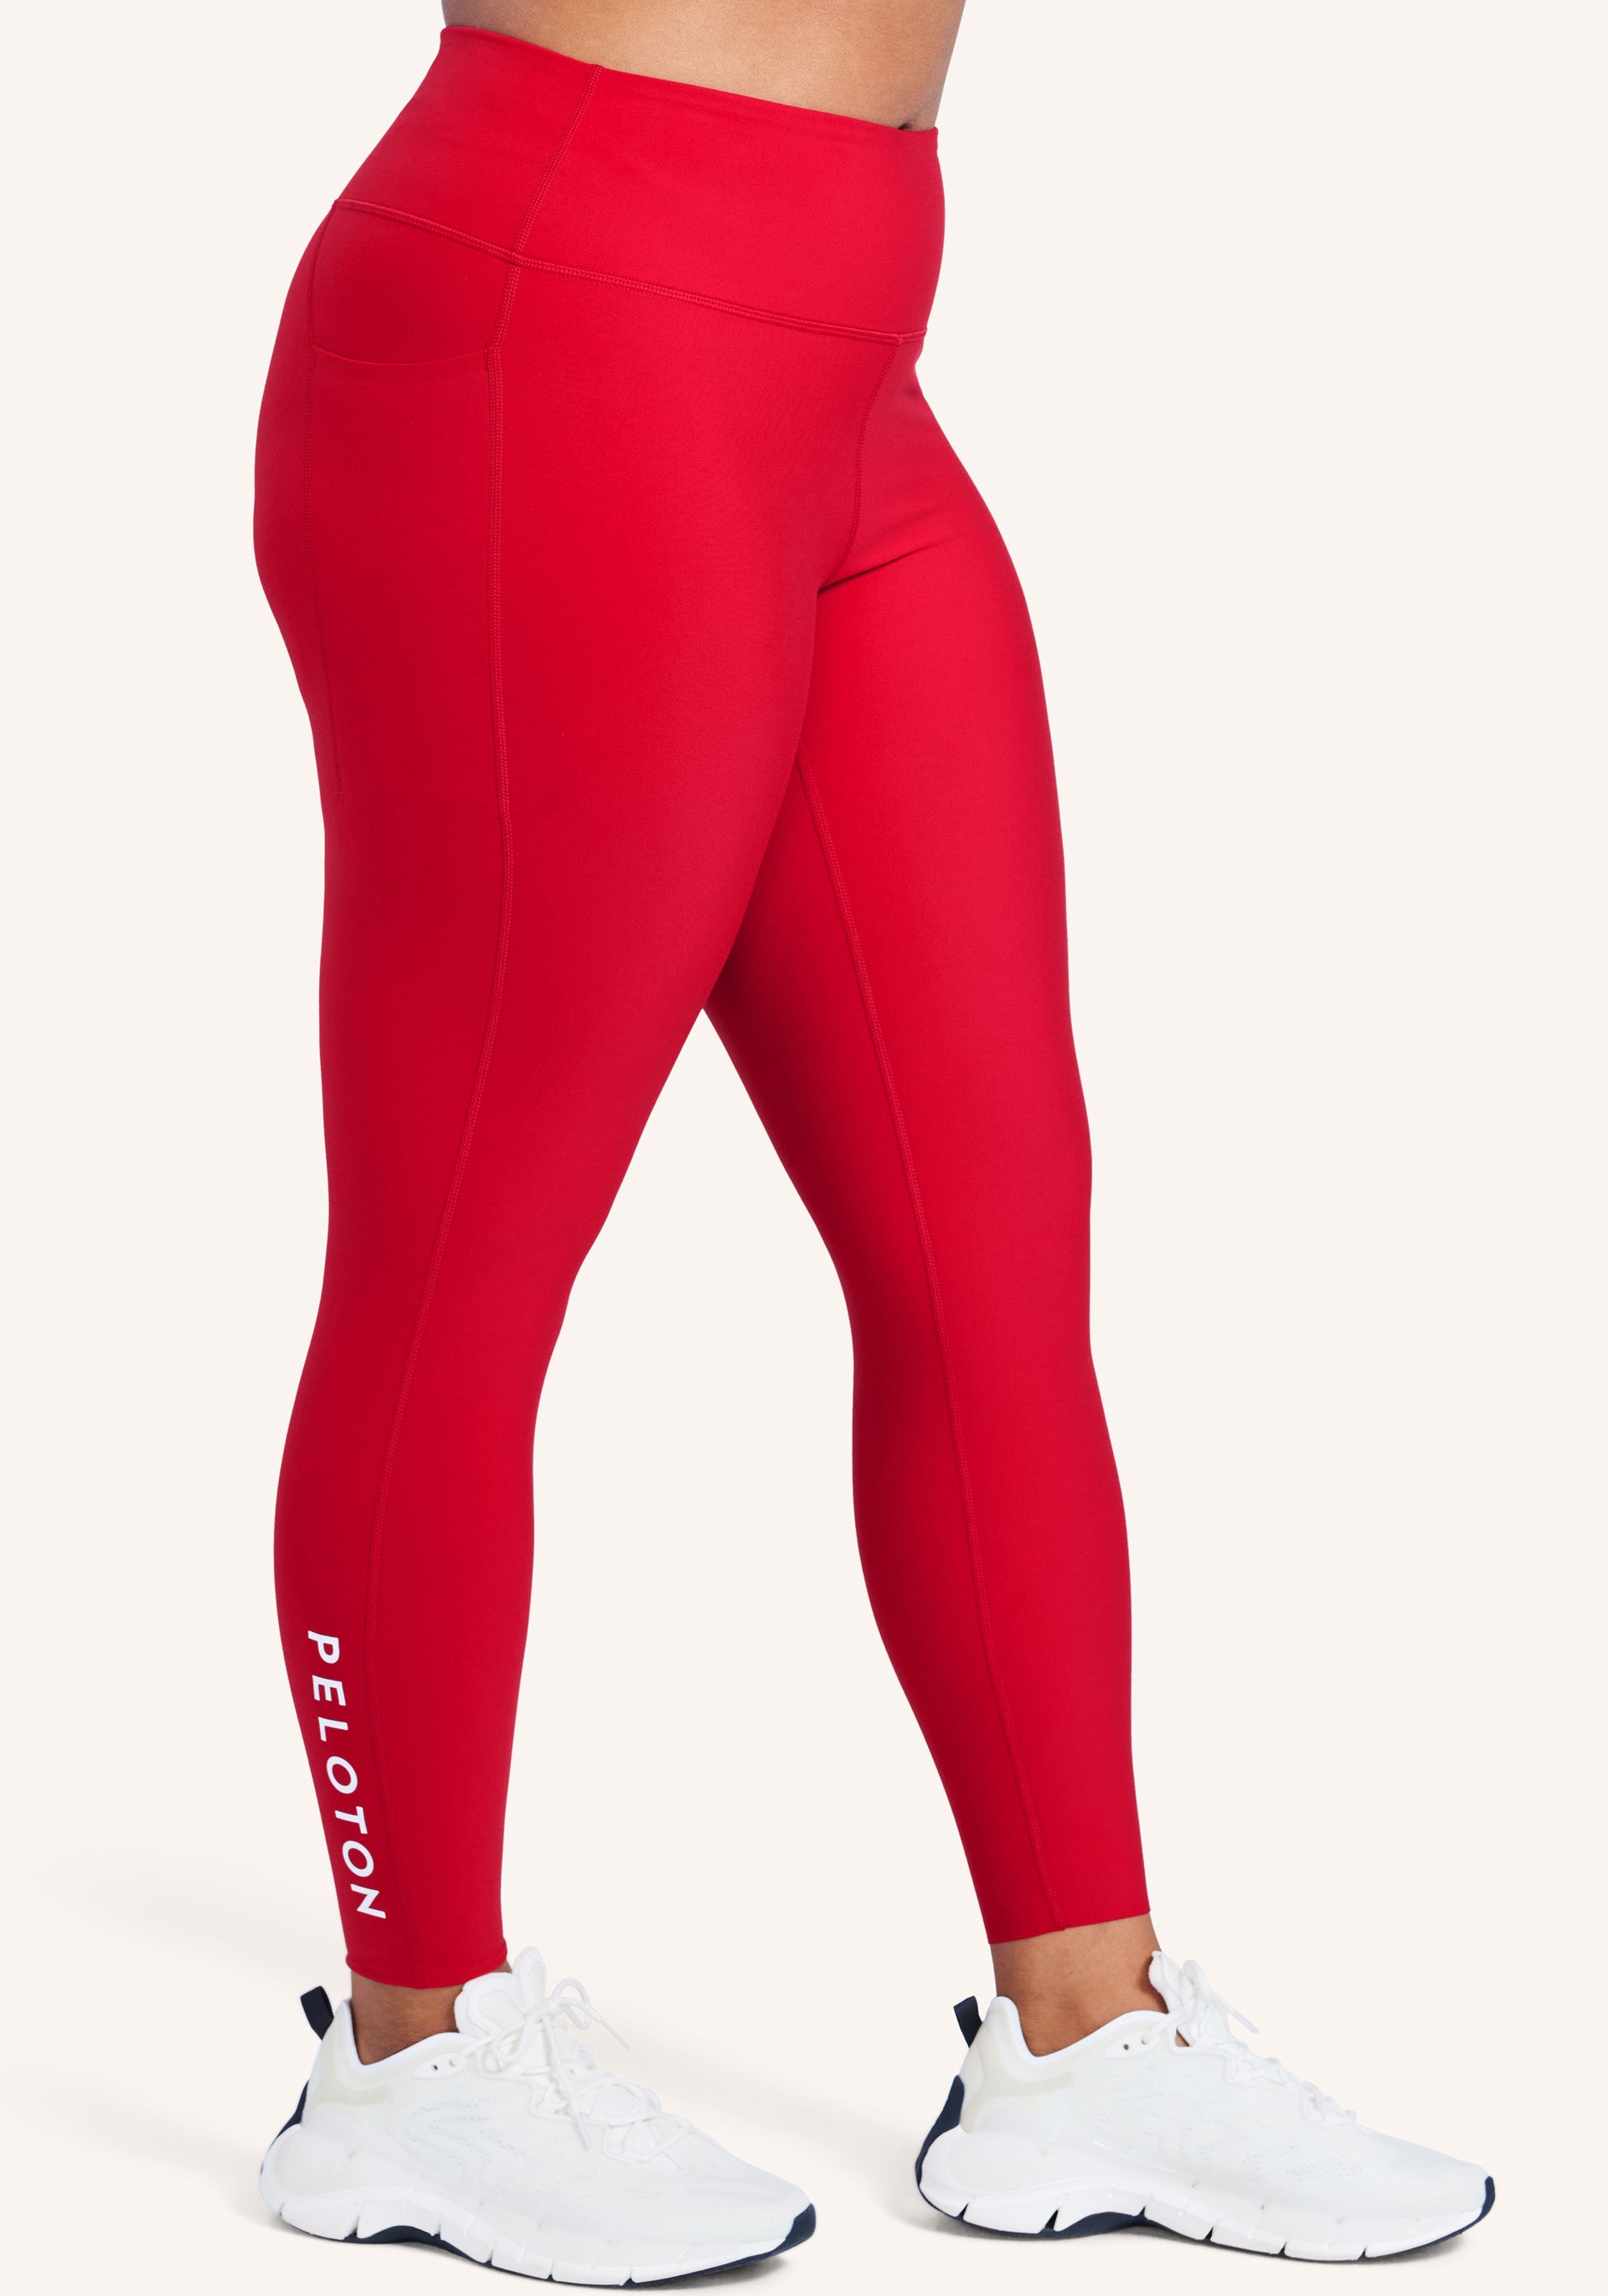 Peloton Flex Leggings in Shiny Berry Red Together We Go Far Size XXL - $50  - From Callie